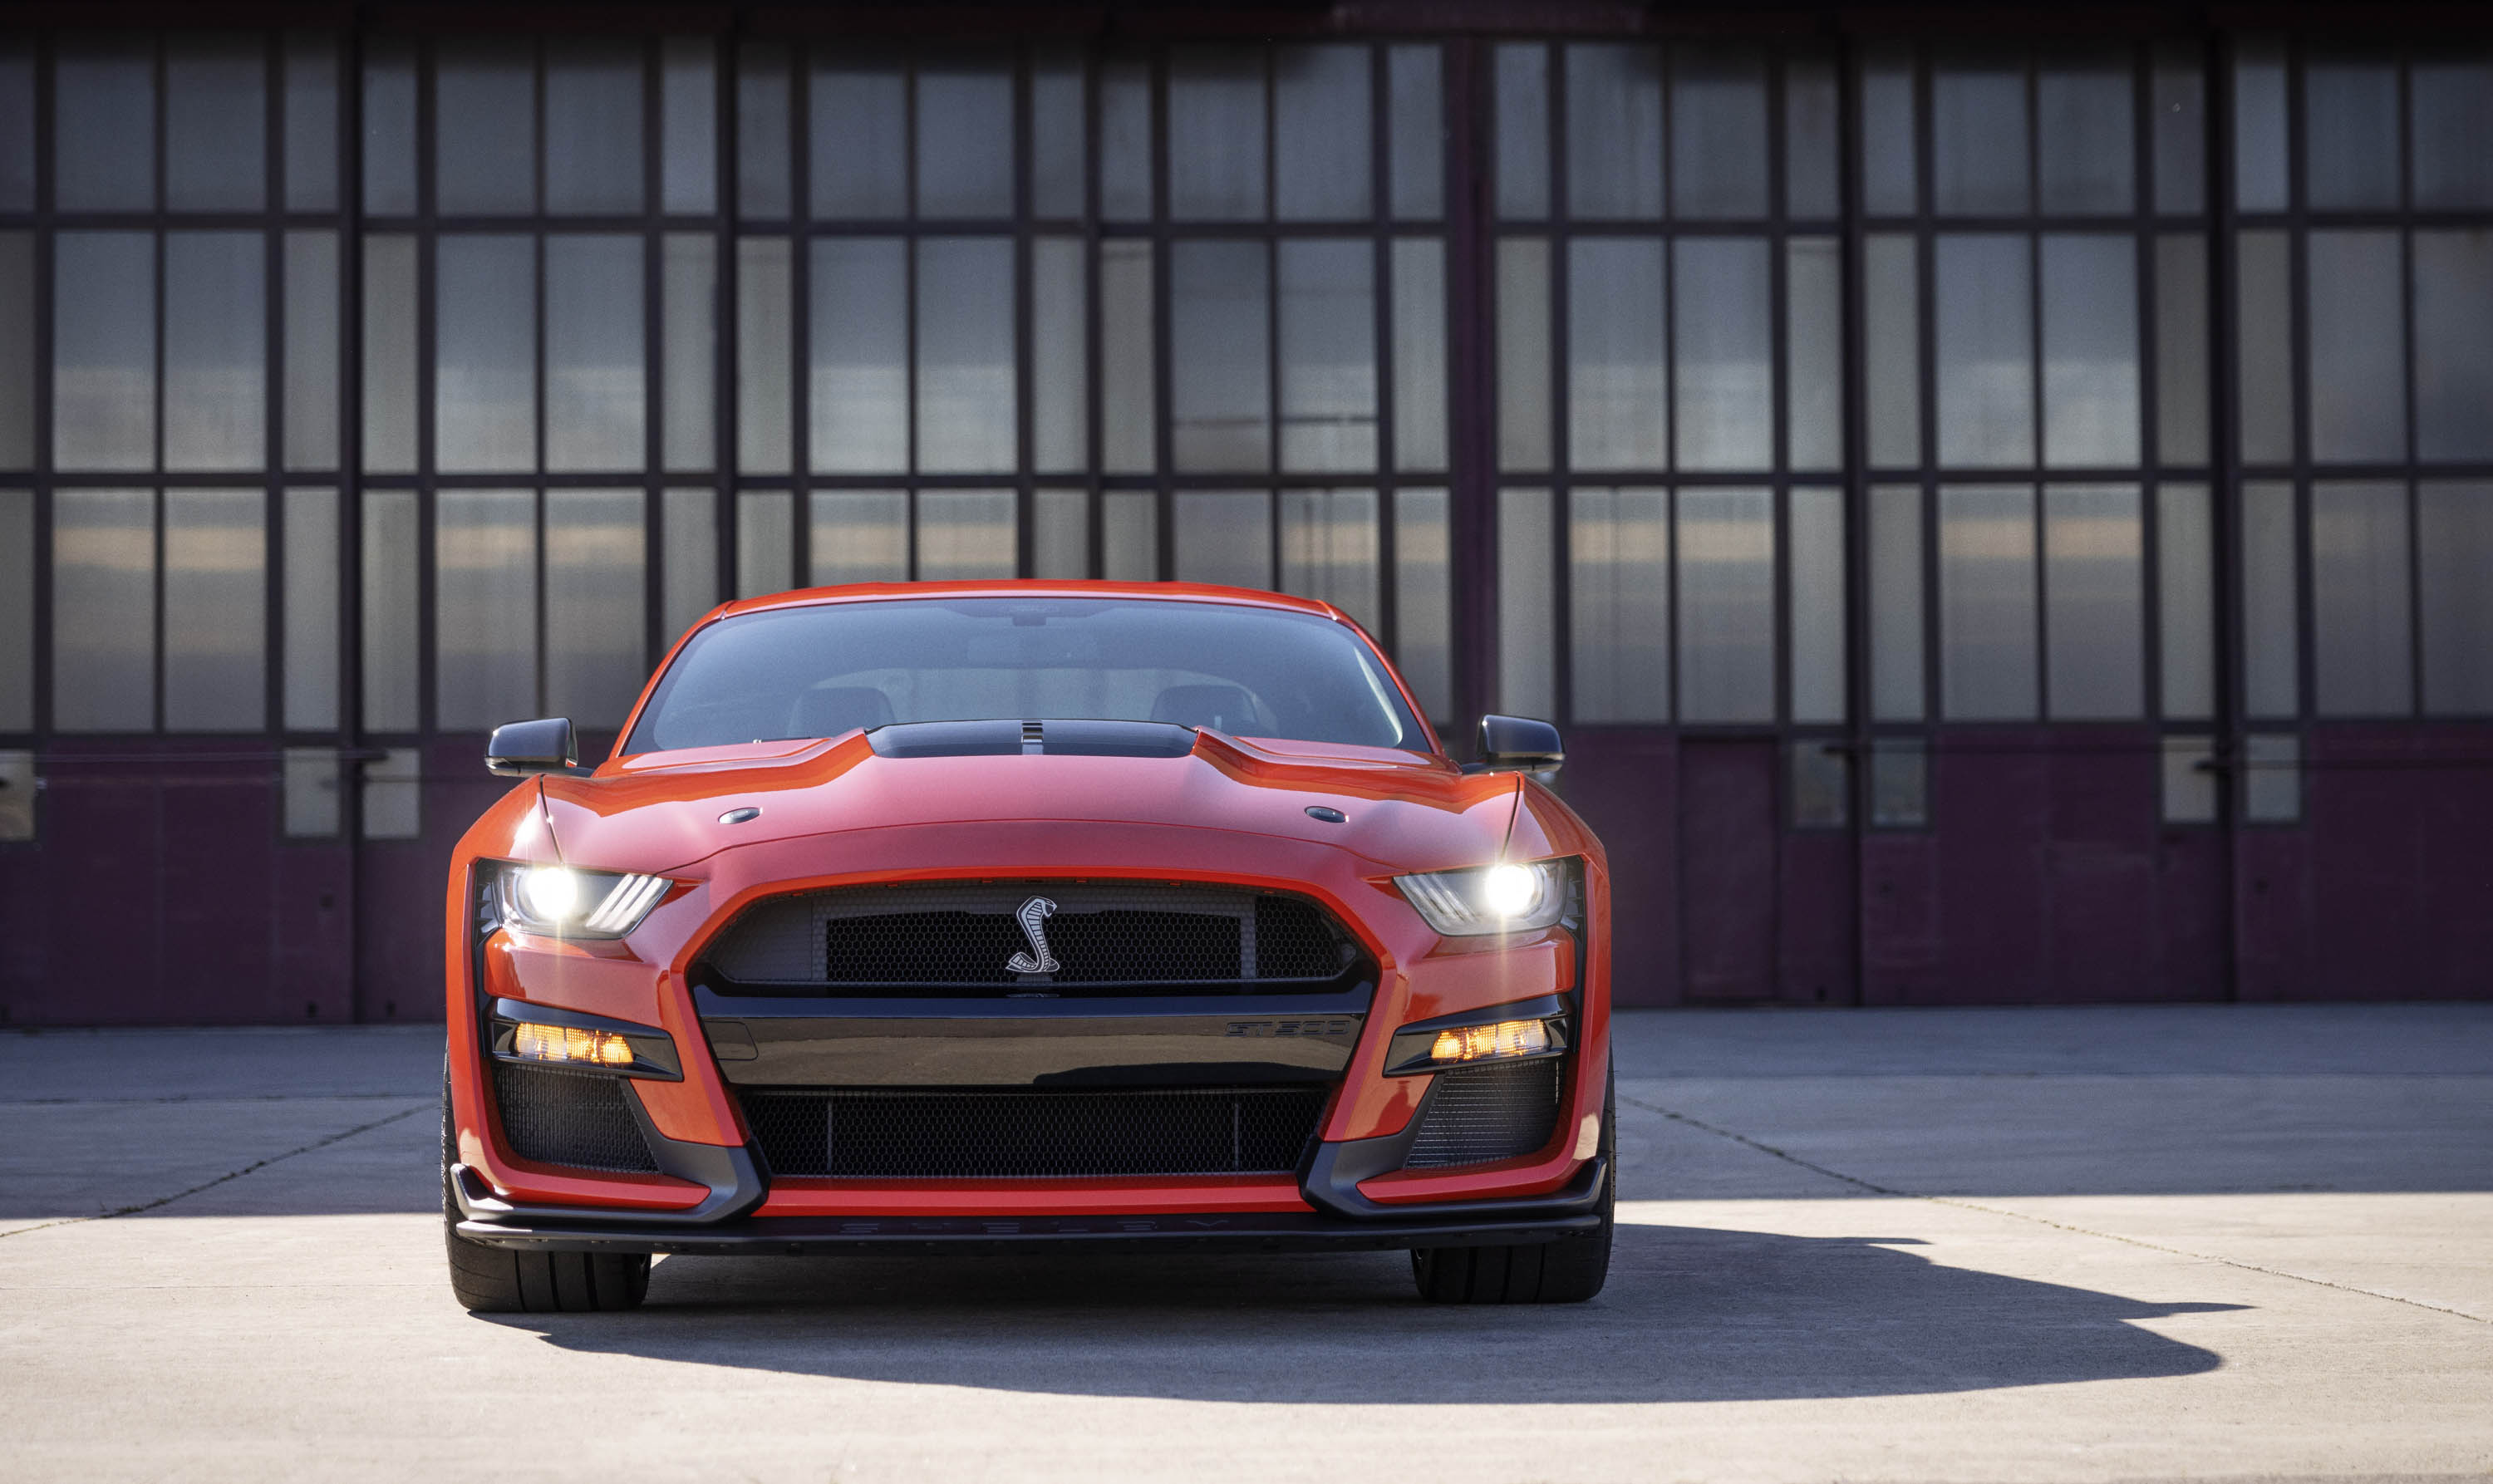 Mustang Shelby GT500 Heritage Edition (2022) Picture 1 of 49